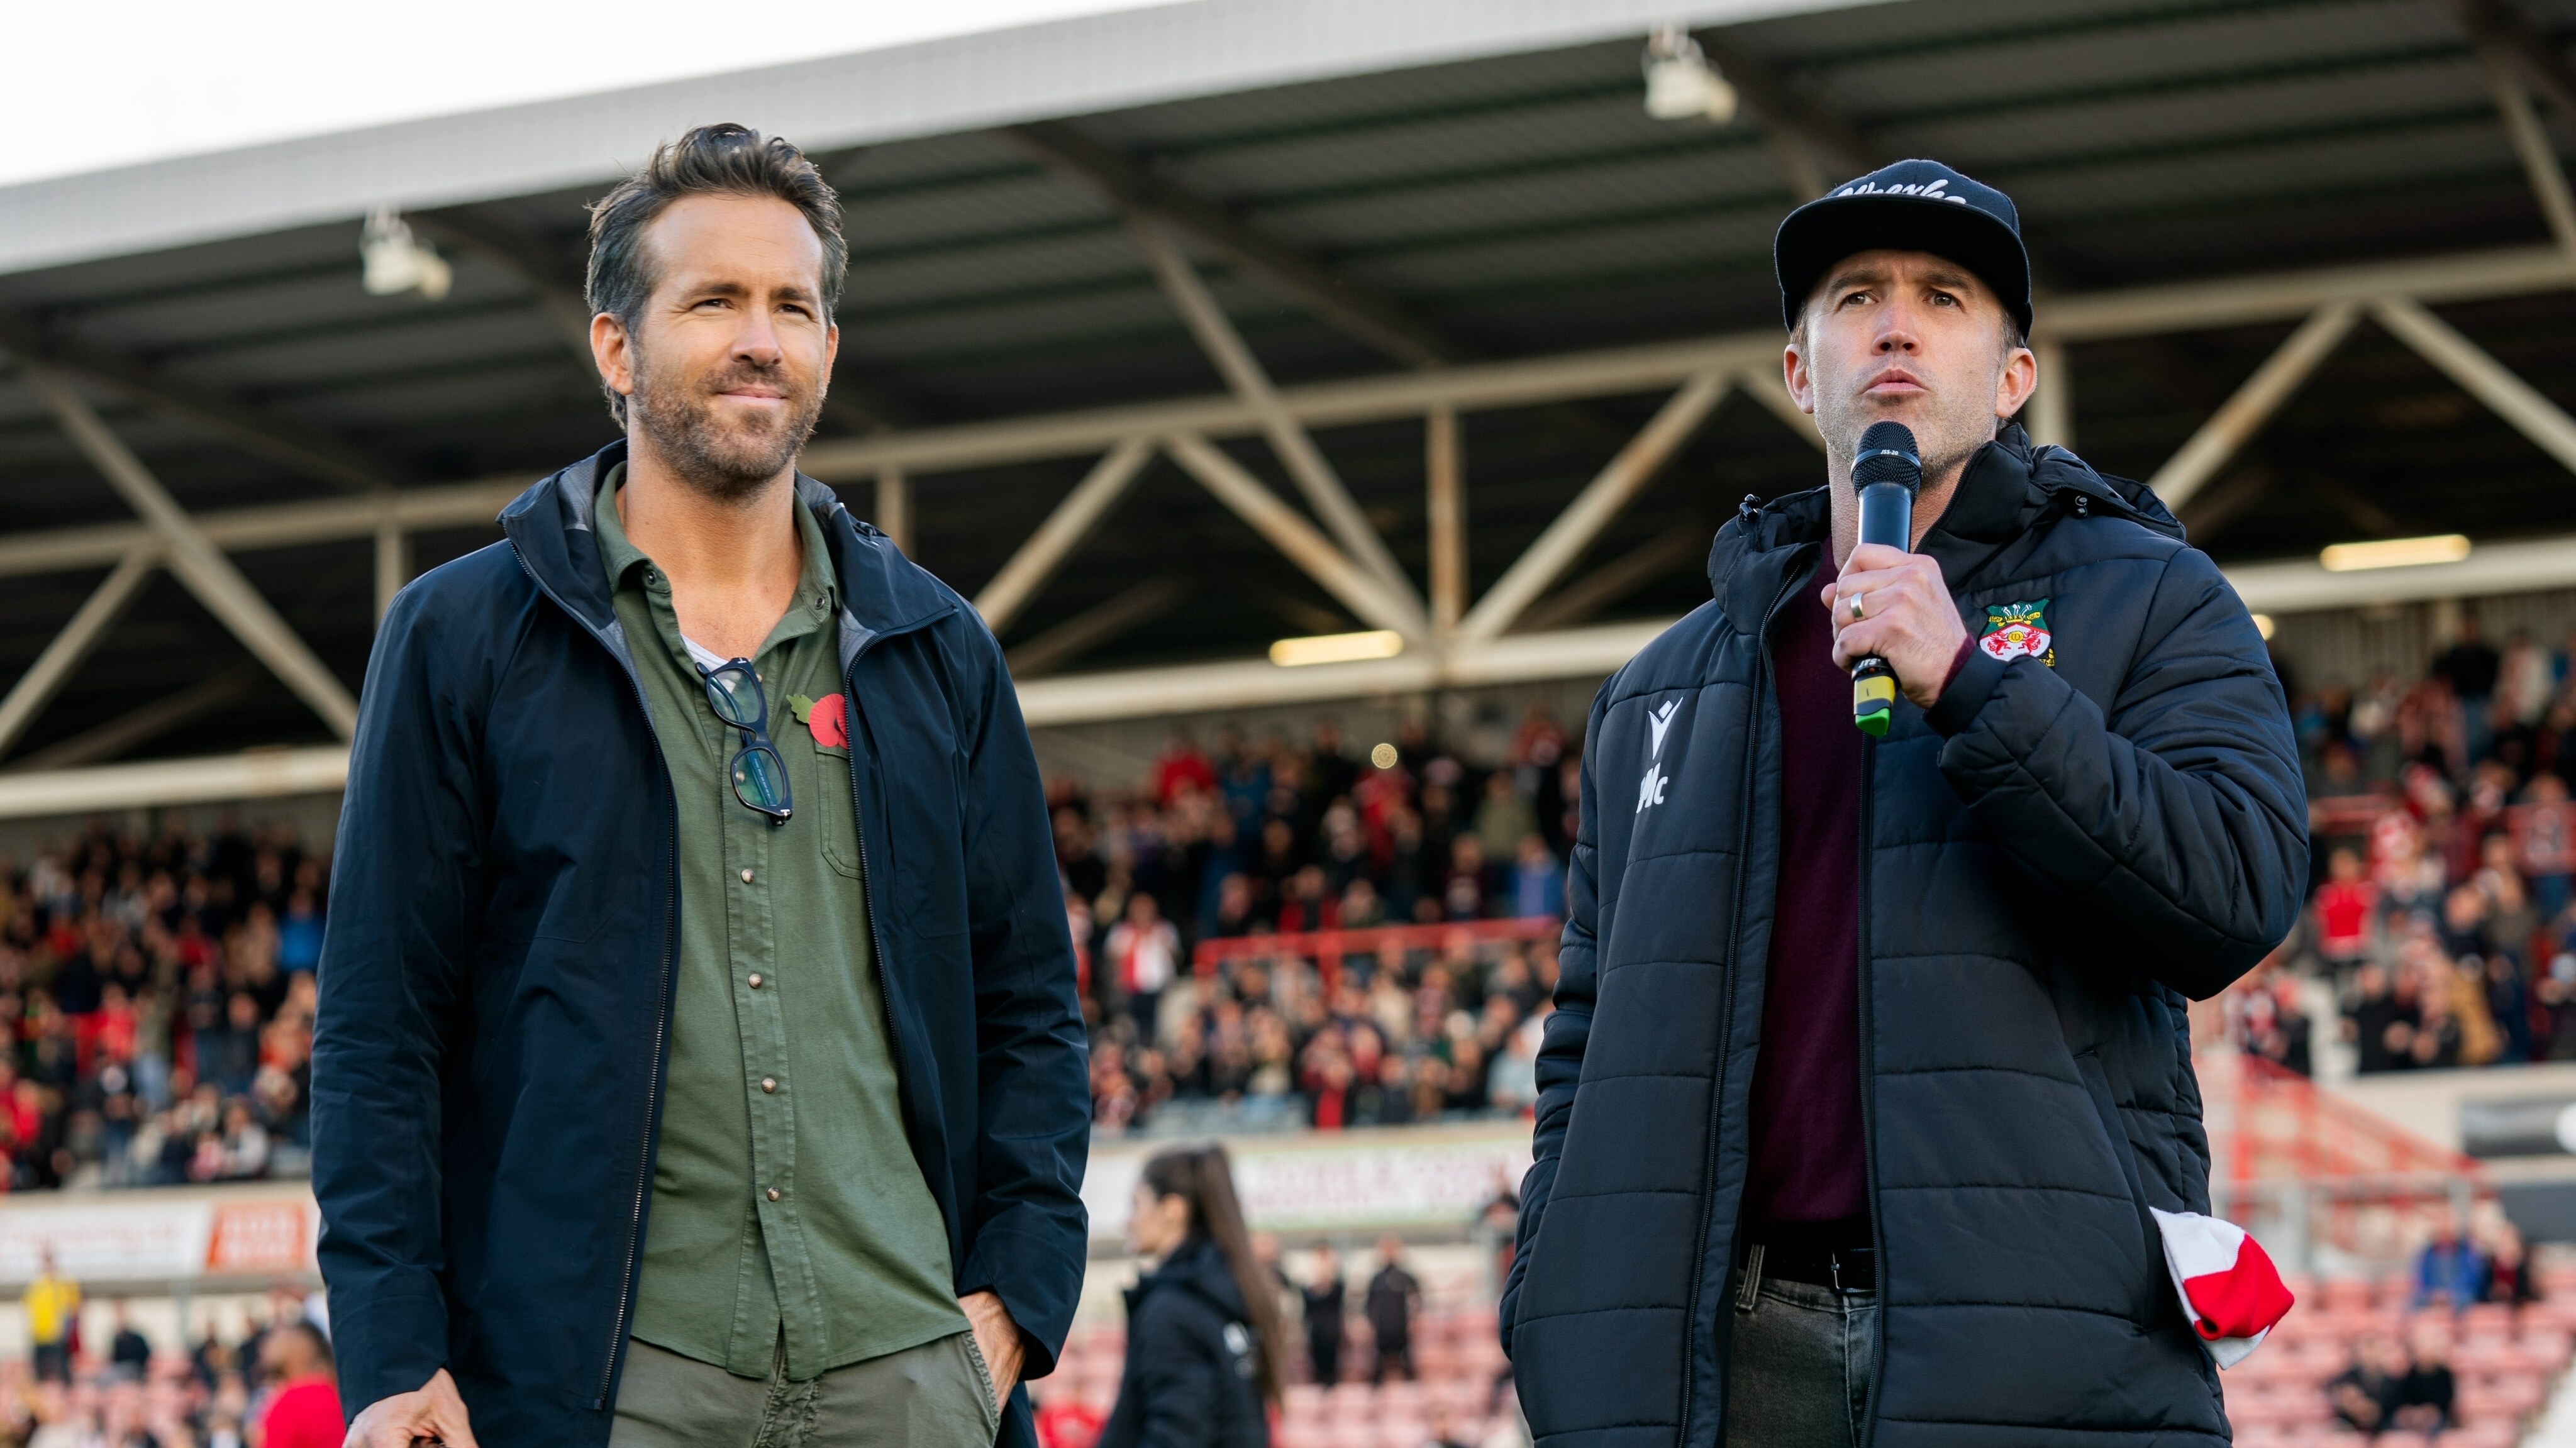 DISNEY+ DEBUTS TRAILER FOR NEW ORIGINAL DOCUSERIES “WELCOME TO WREXHAM” FROM EXECUTIVE PRODUCERS  ROB MCELHENNEY AND RYAN REYNOLDS